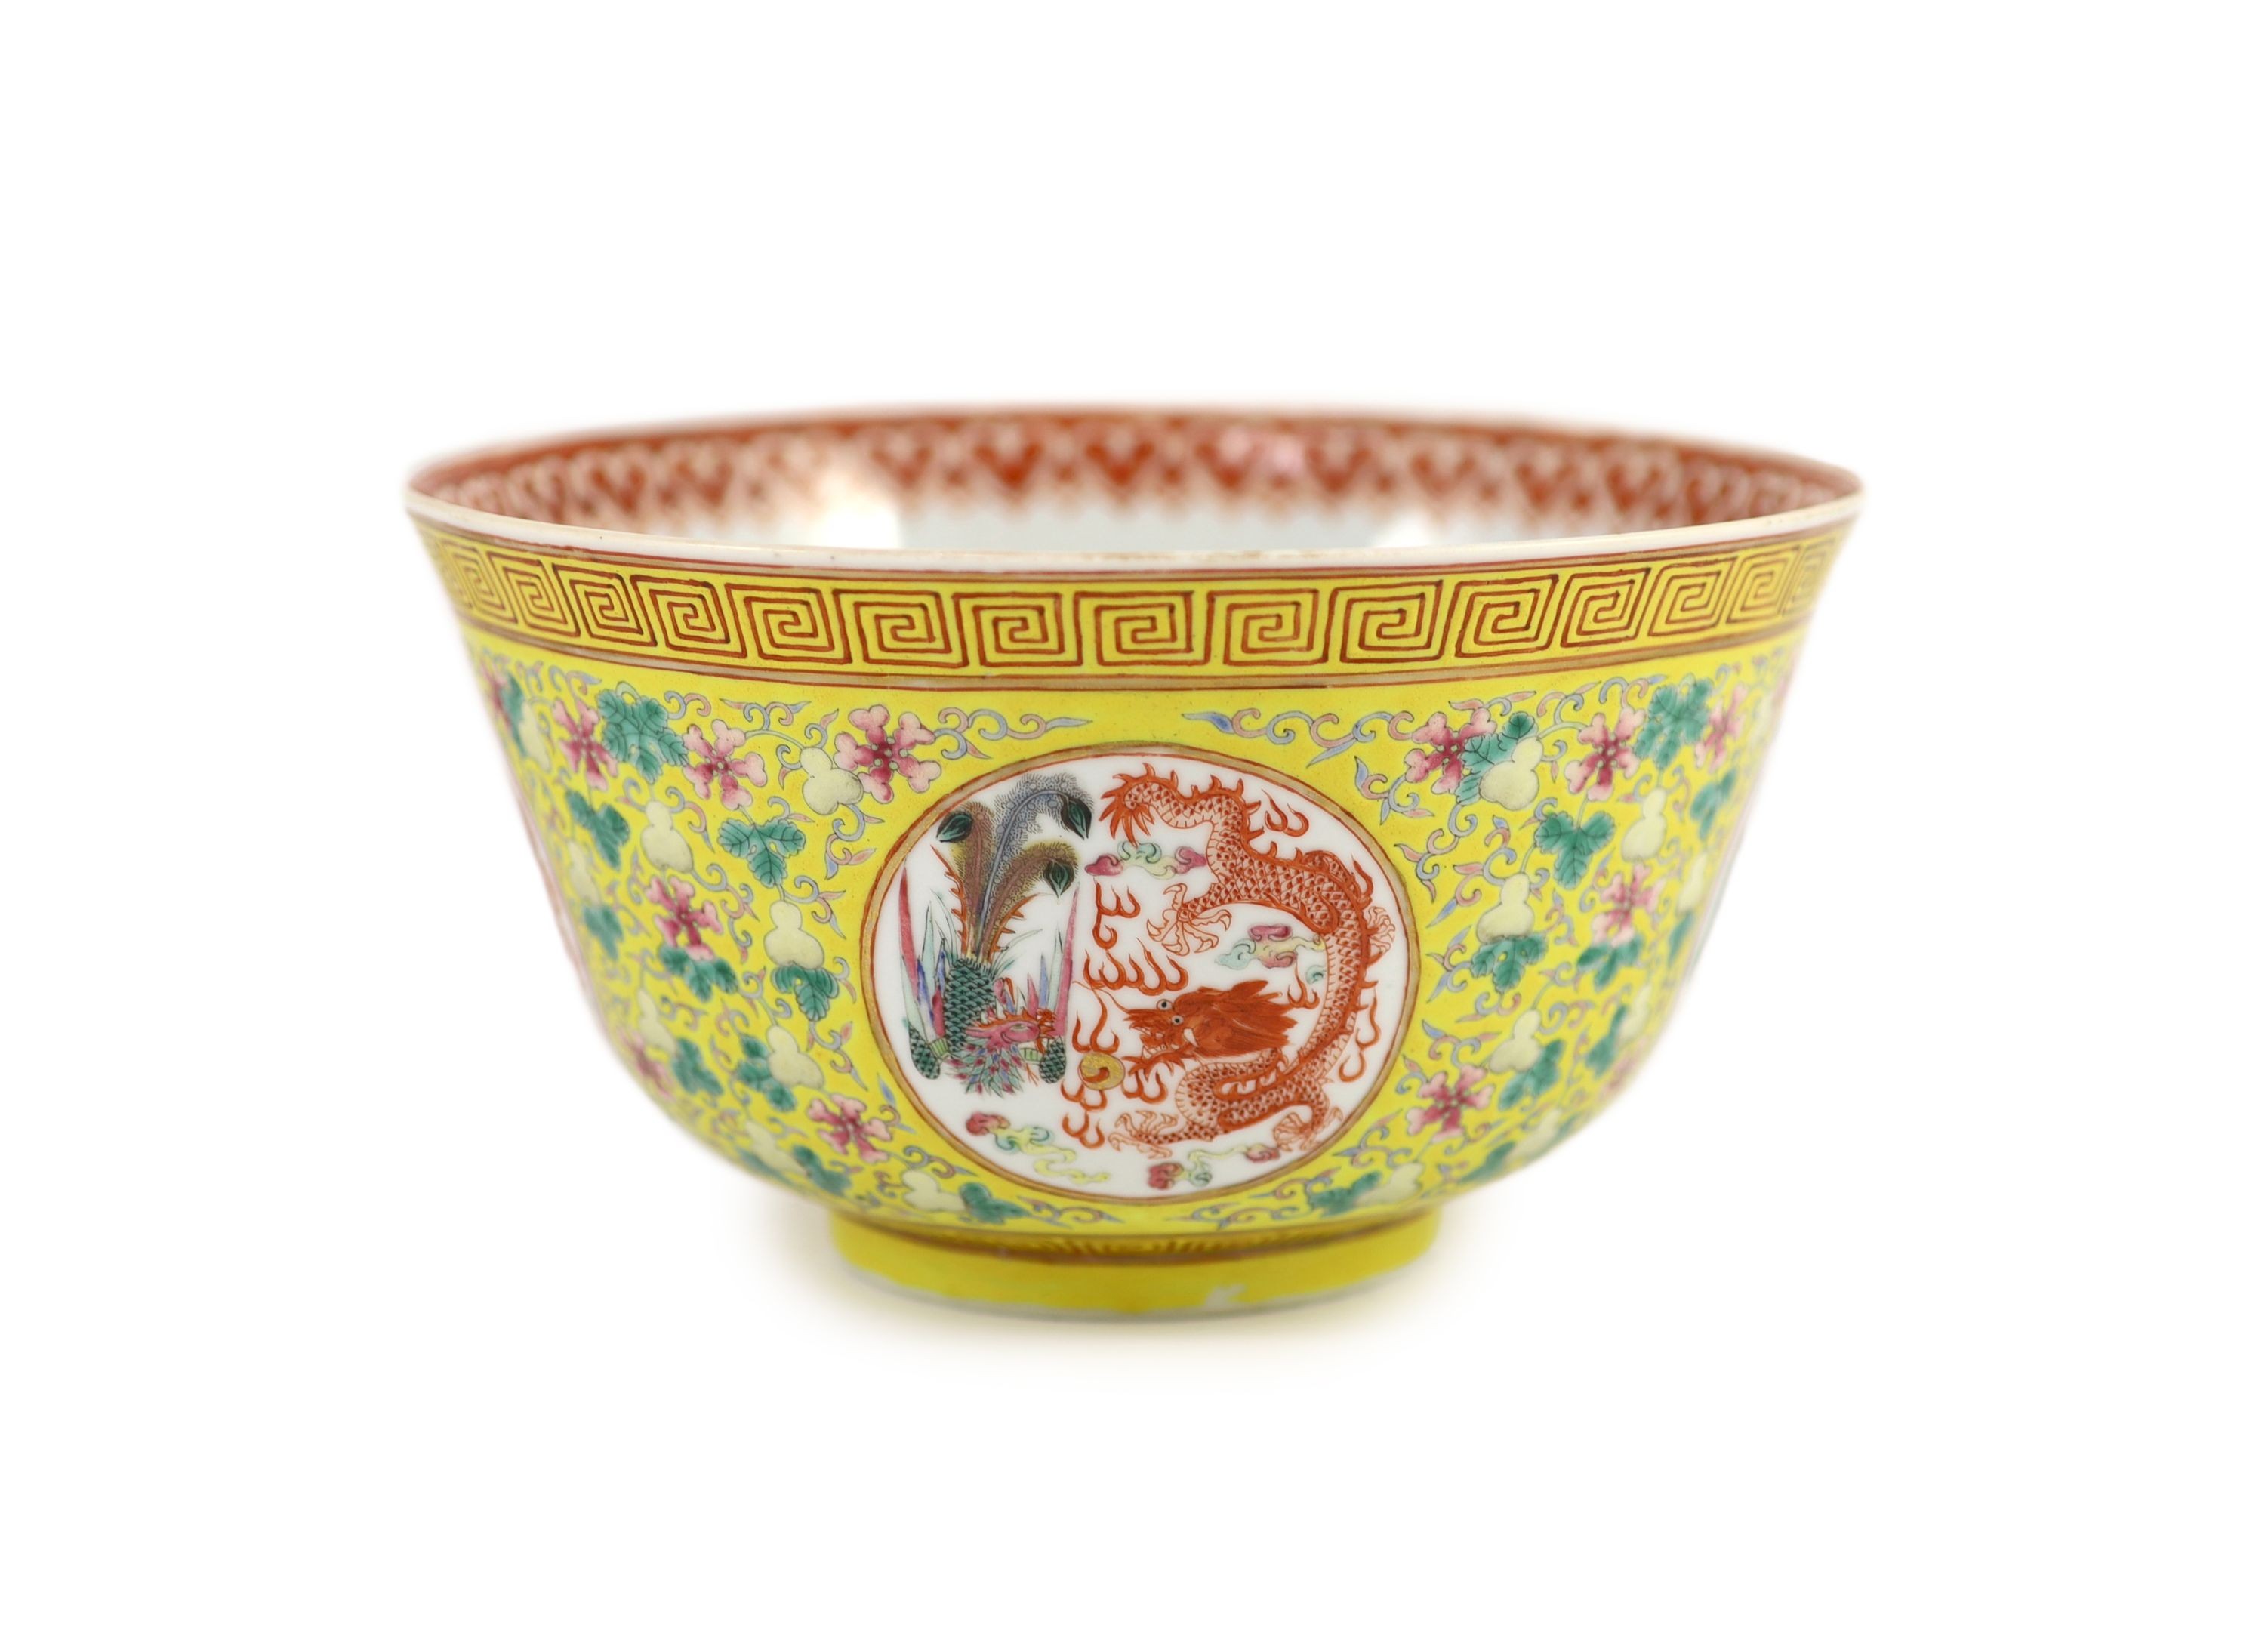 A fine Chinese yellow ground 'dragon and phoenix' medallion deep bowl, Guangxu mark and period (1875-1908), 20.6 cm diameter, 11.2 cm high, gilding to rim worn